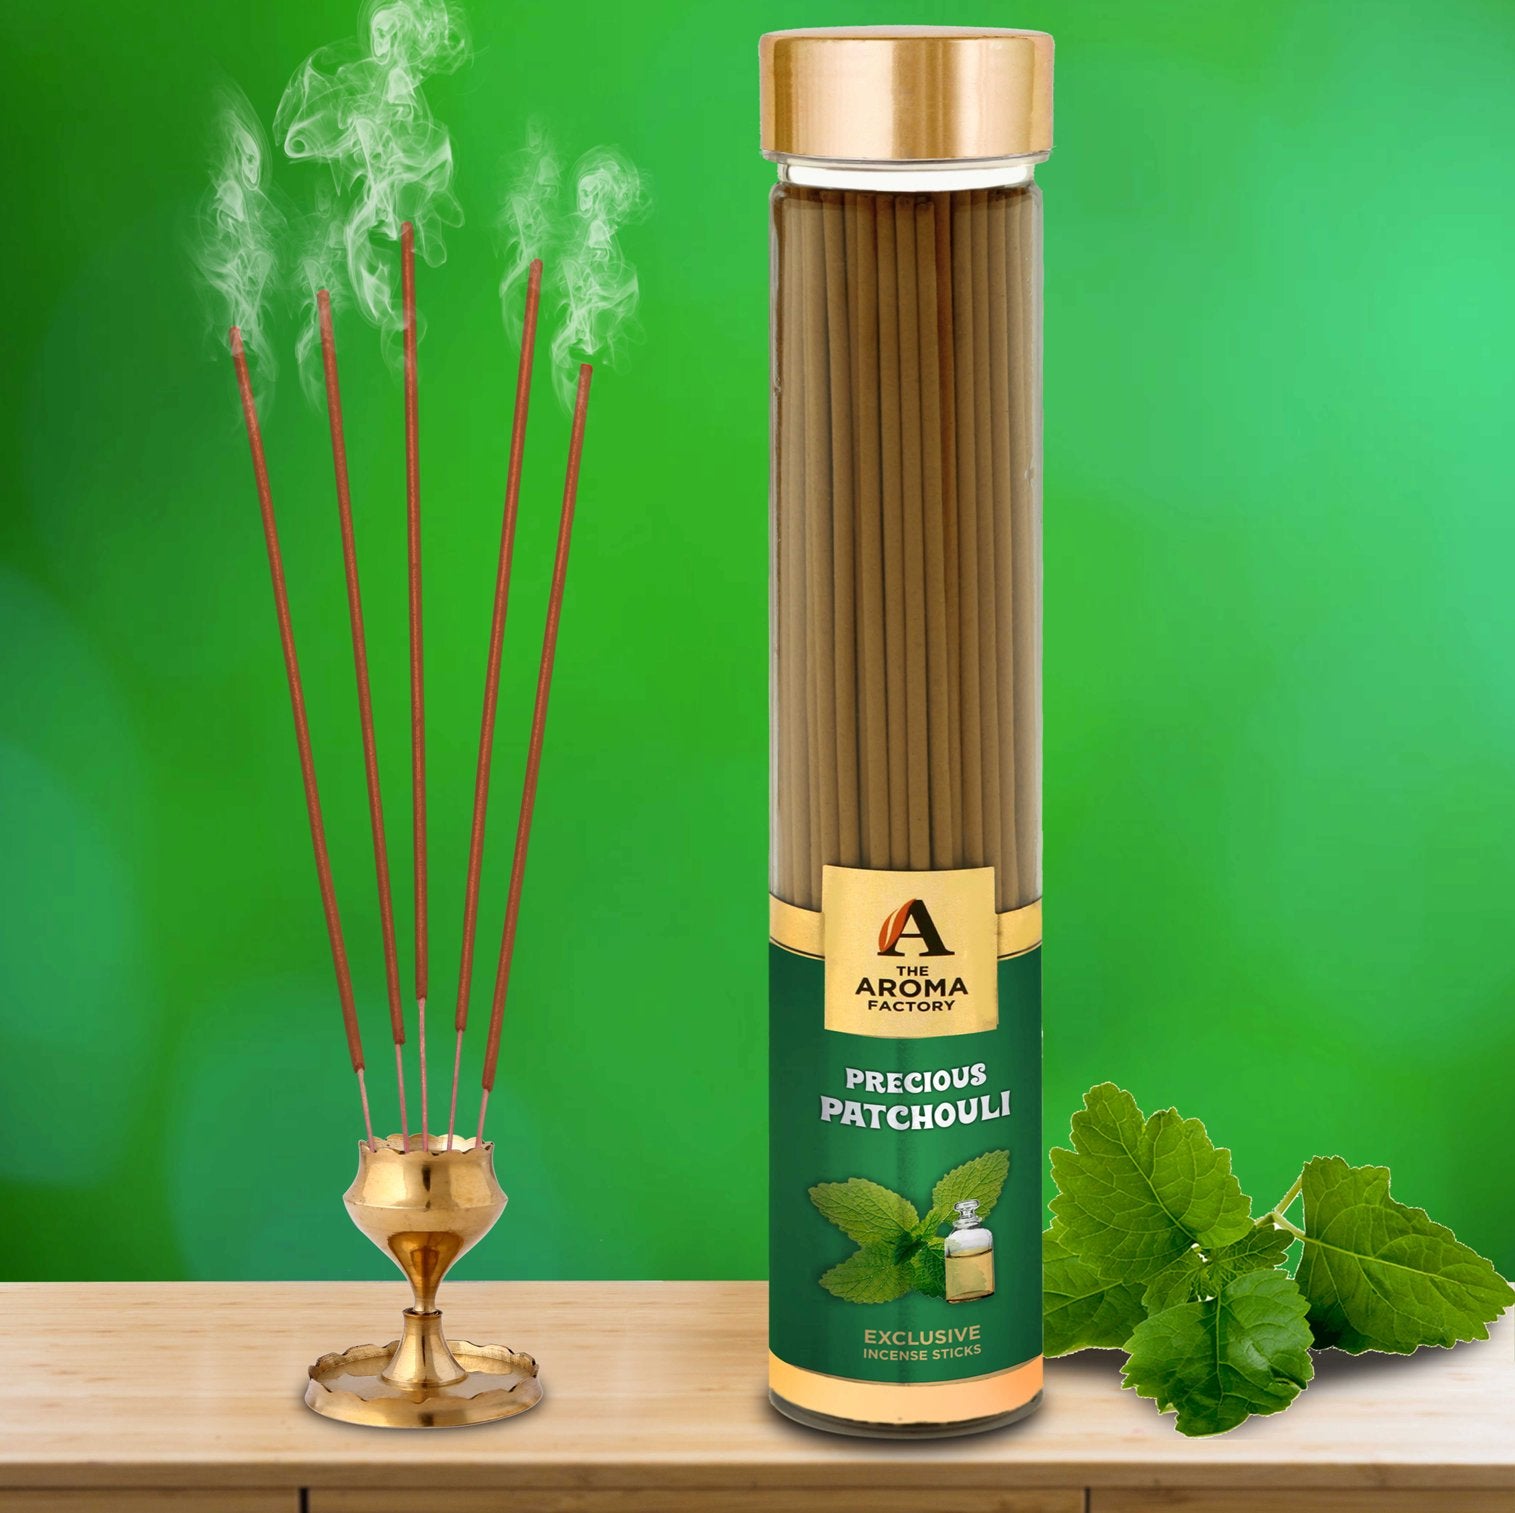 The Aroma Factory Precious Patchouli Incense Sticks Agarbatti (Charcoal Free & 100% Herbal) Bottle, 100g